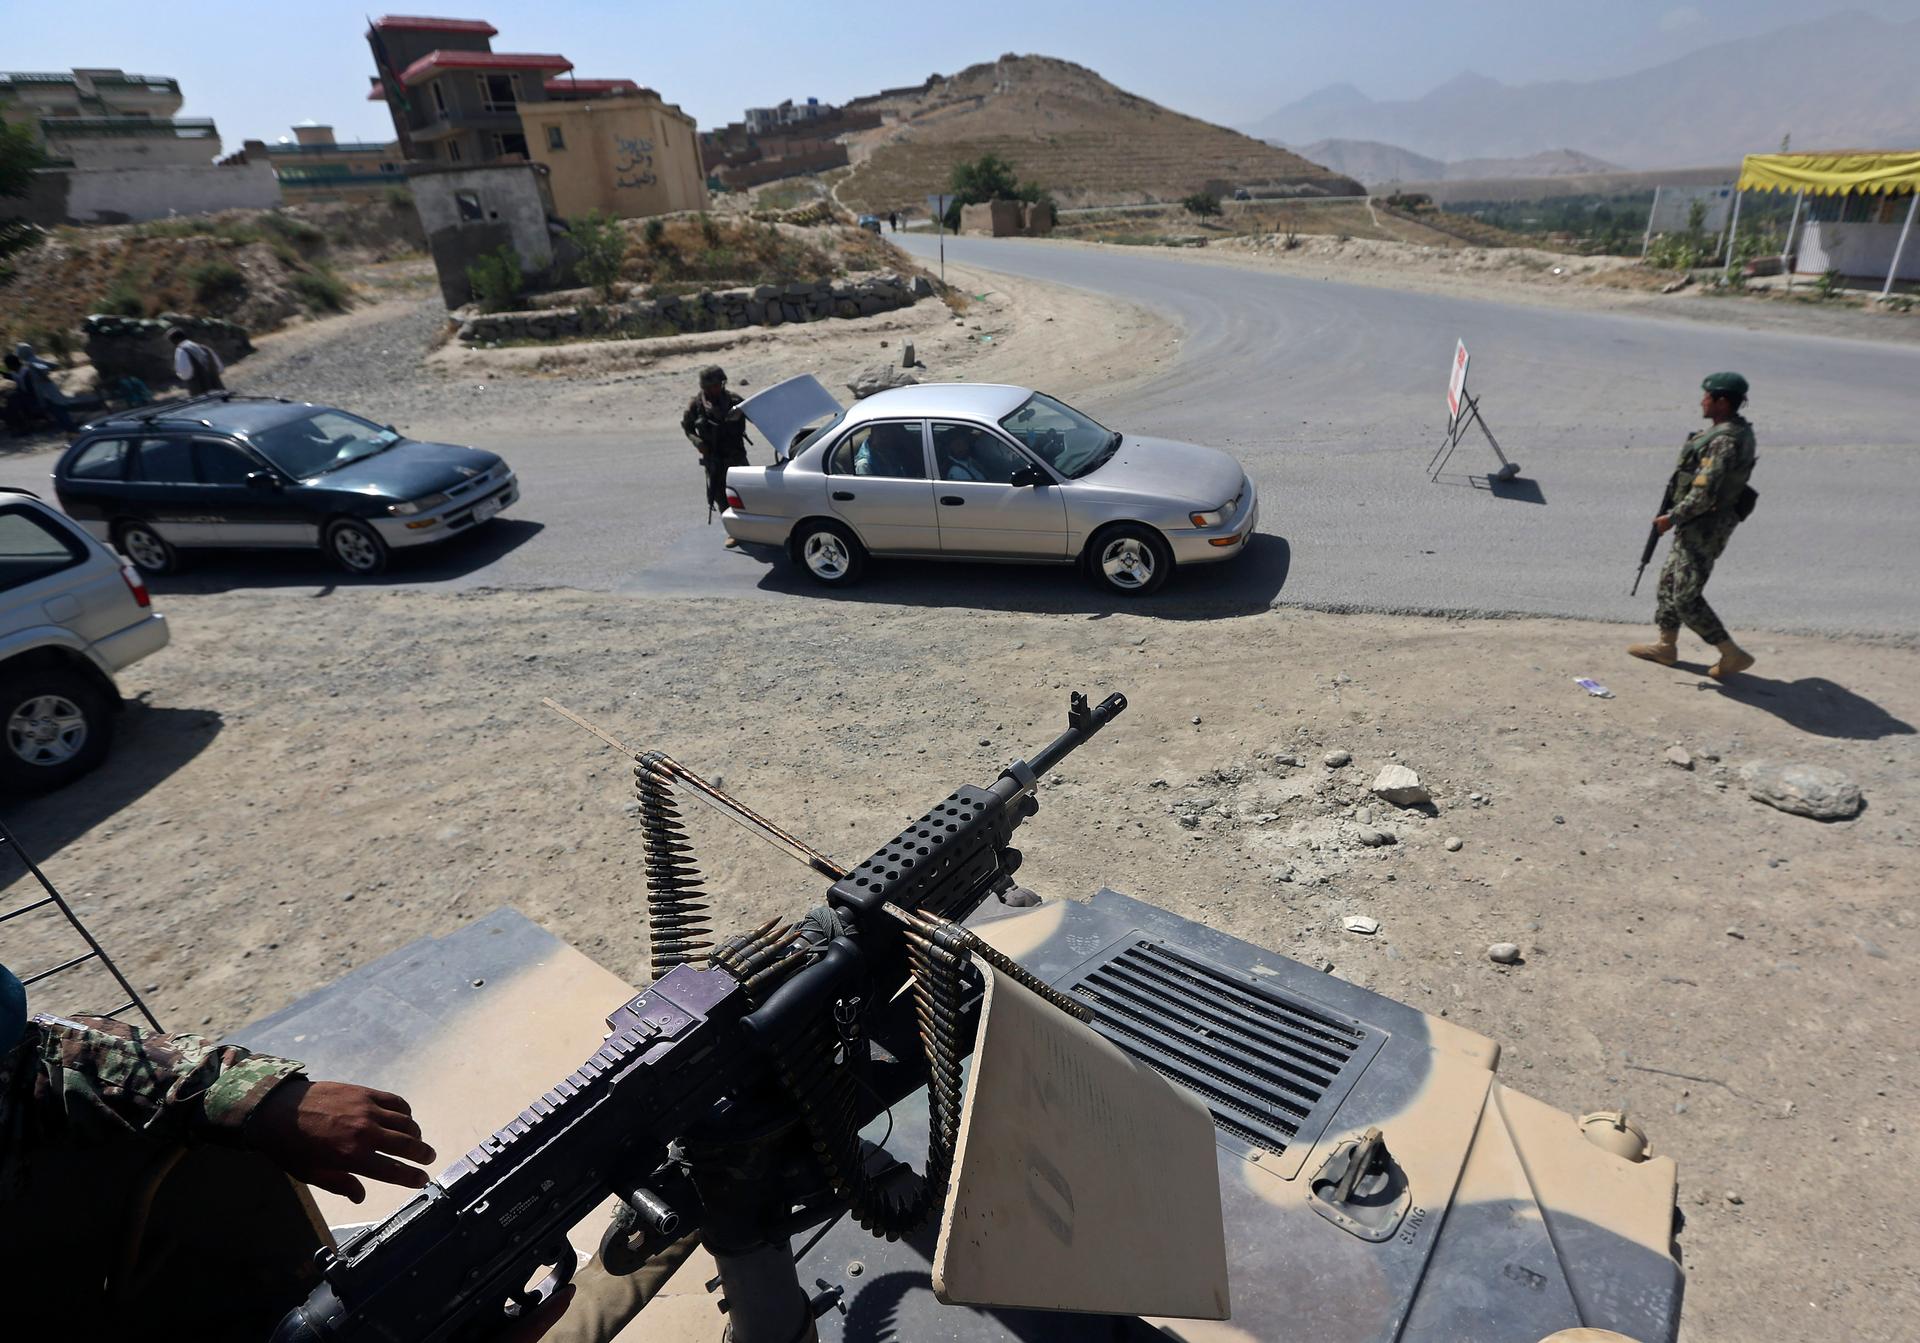 Afghan National Army soldiers inspect a car at a checkpoint near the British-run military training academy, Camp Qargha, in Kabul on August 6, 2014.